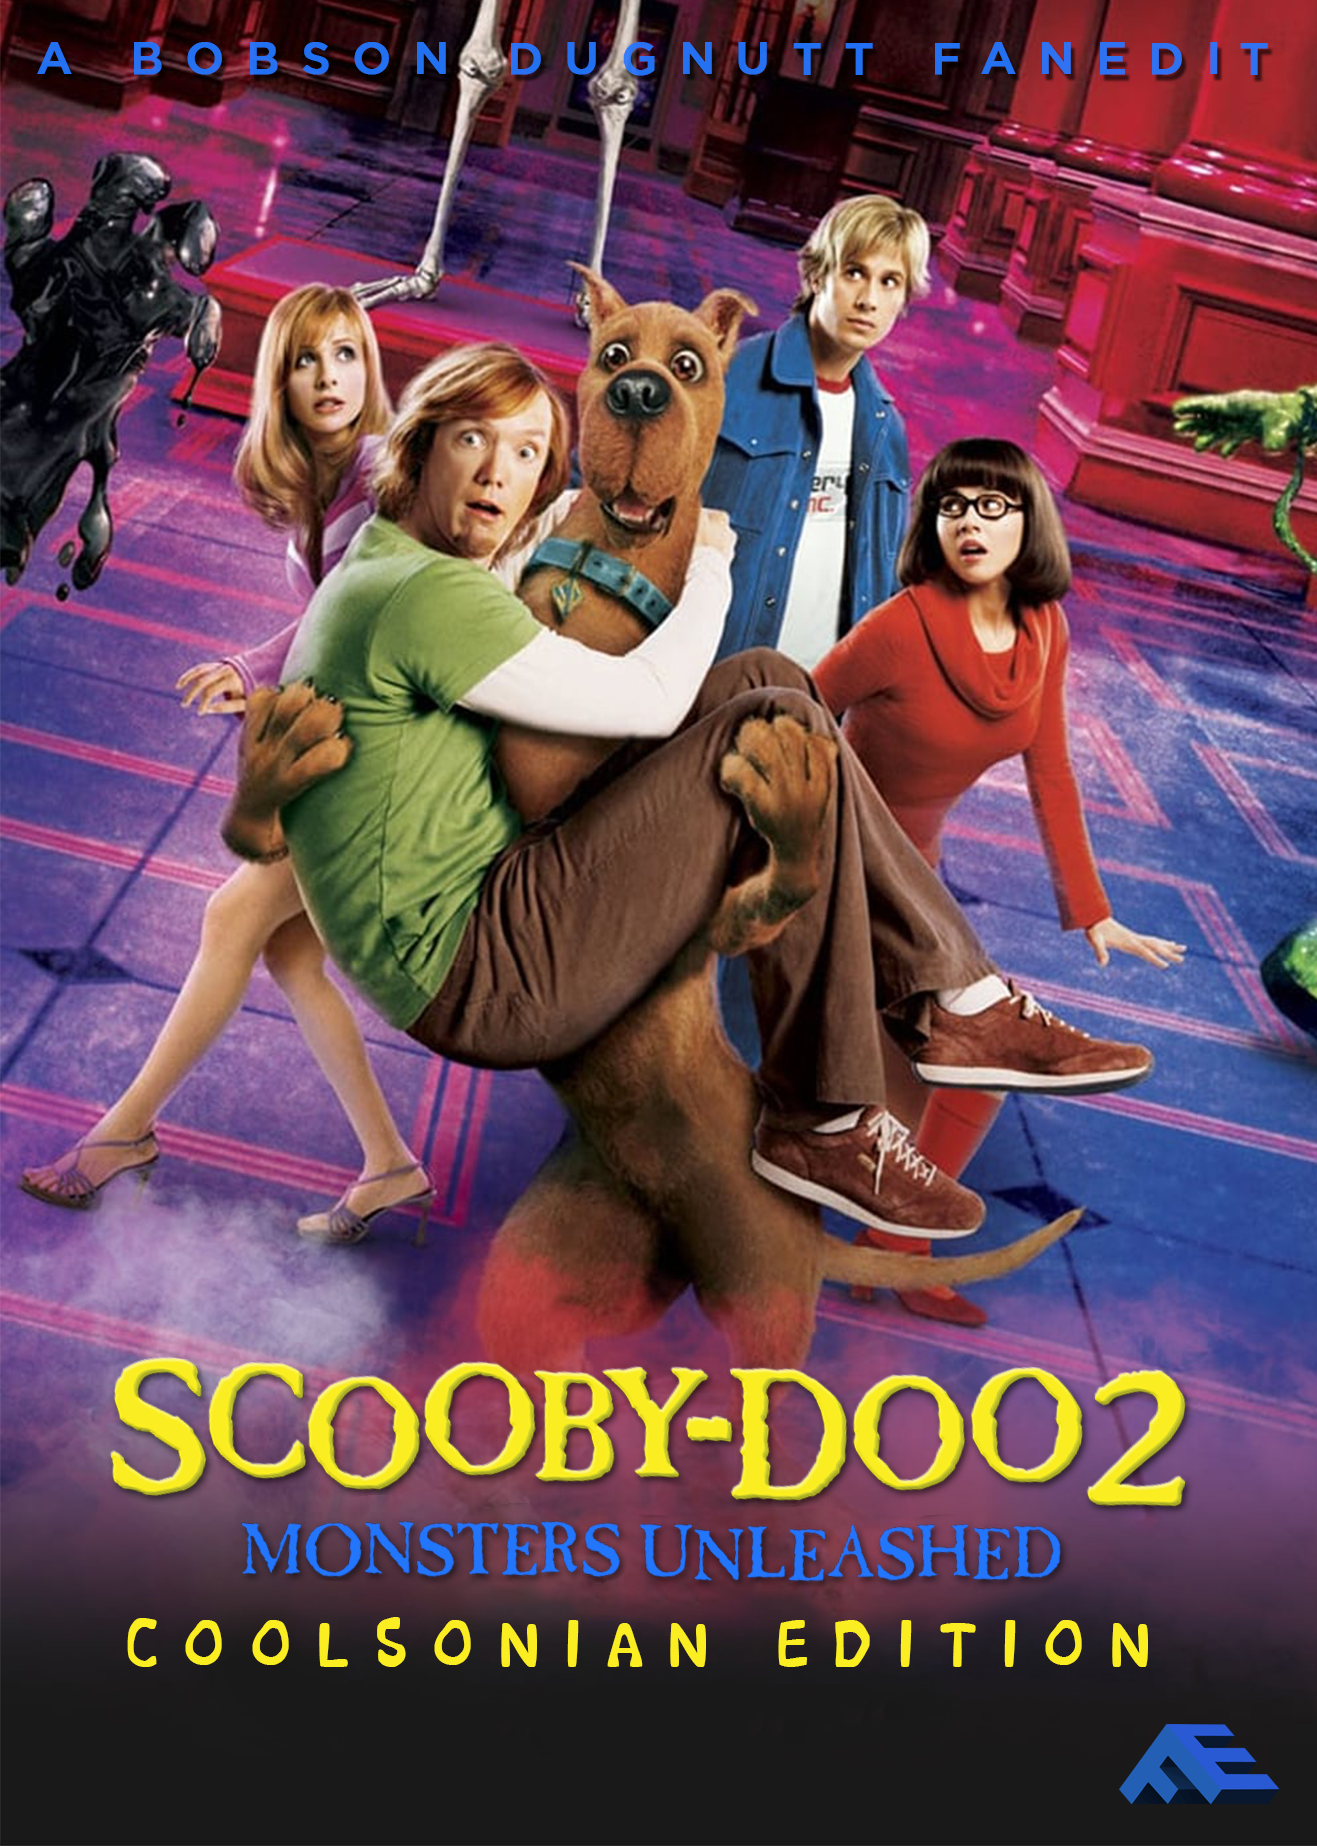 Scooby Doo 2: Monsters Unleashed Edition. Fanedit.org Forums